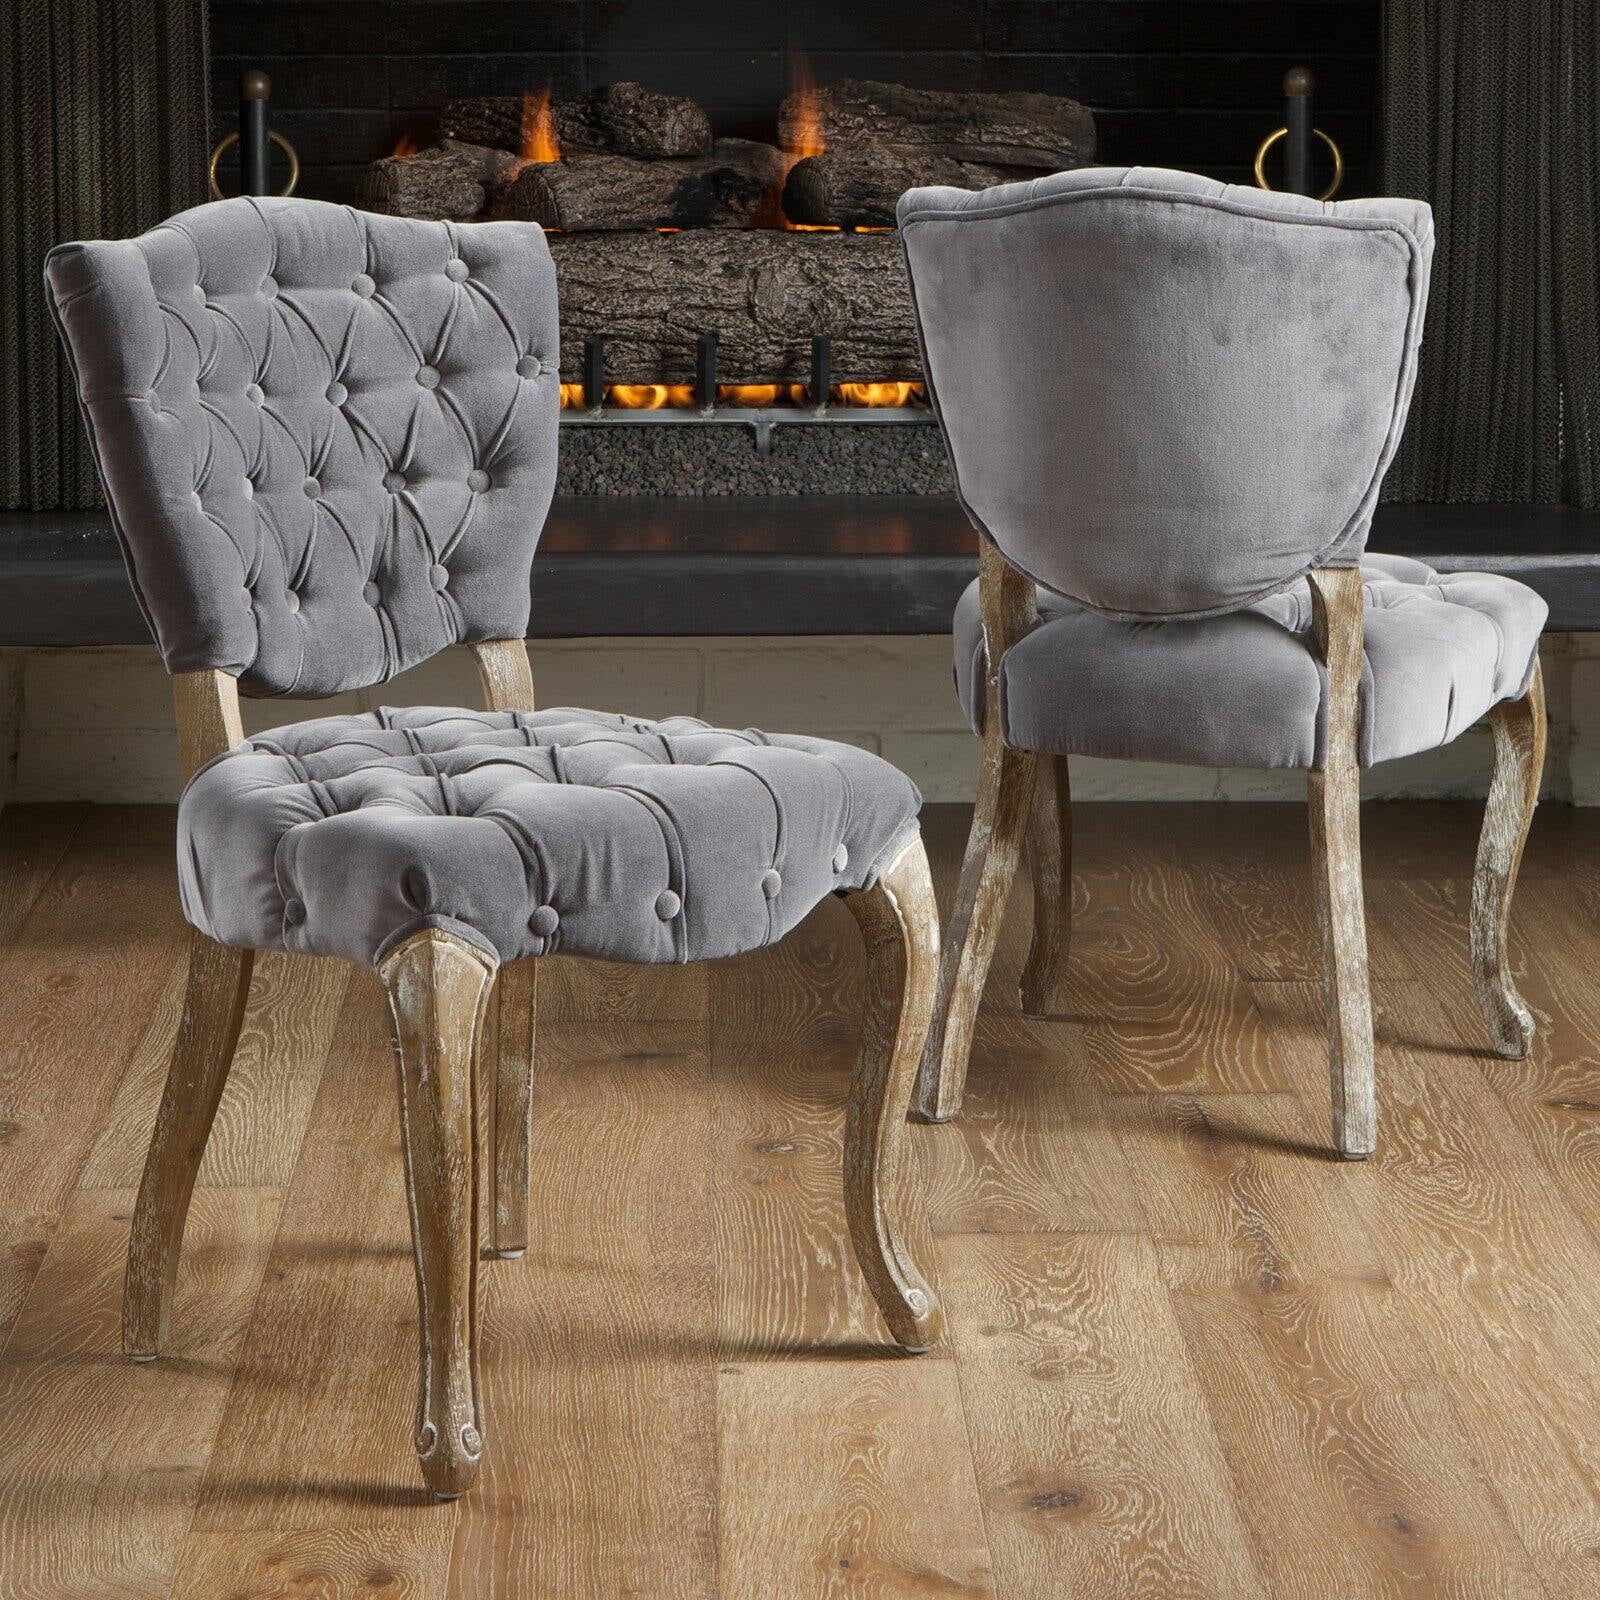 Middleton Tufted Grey Fabric Dining Chairs - 2 Pack - Walmart.com ...